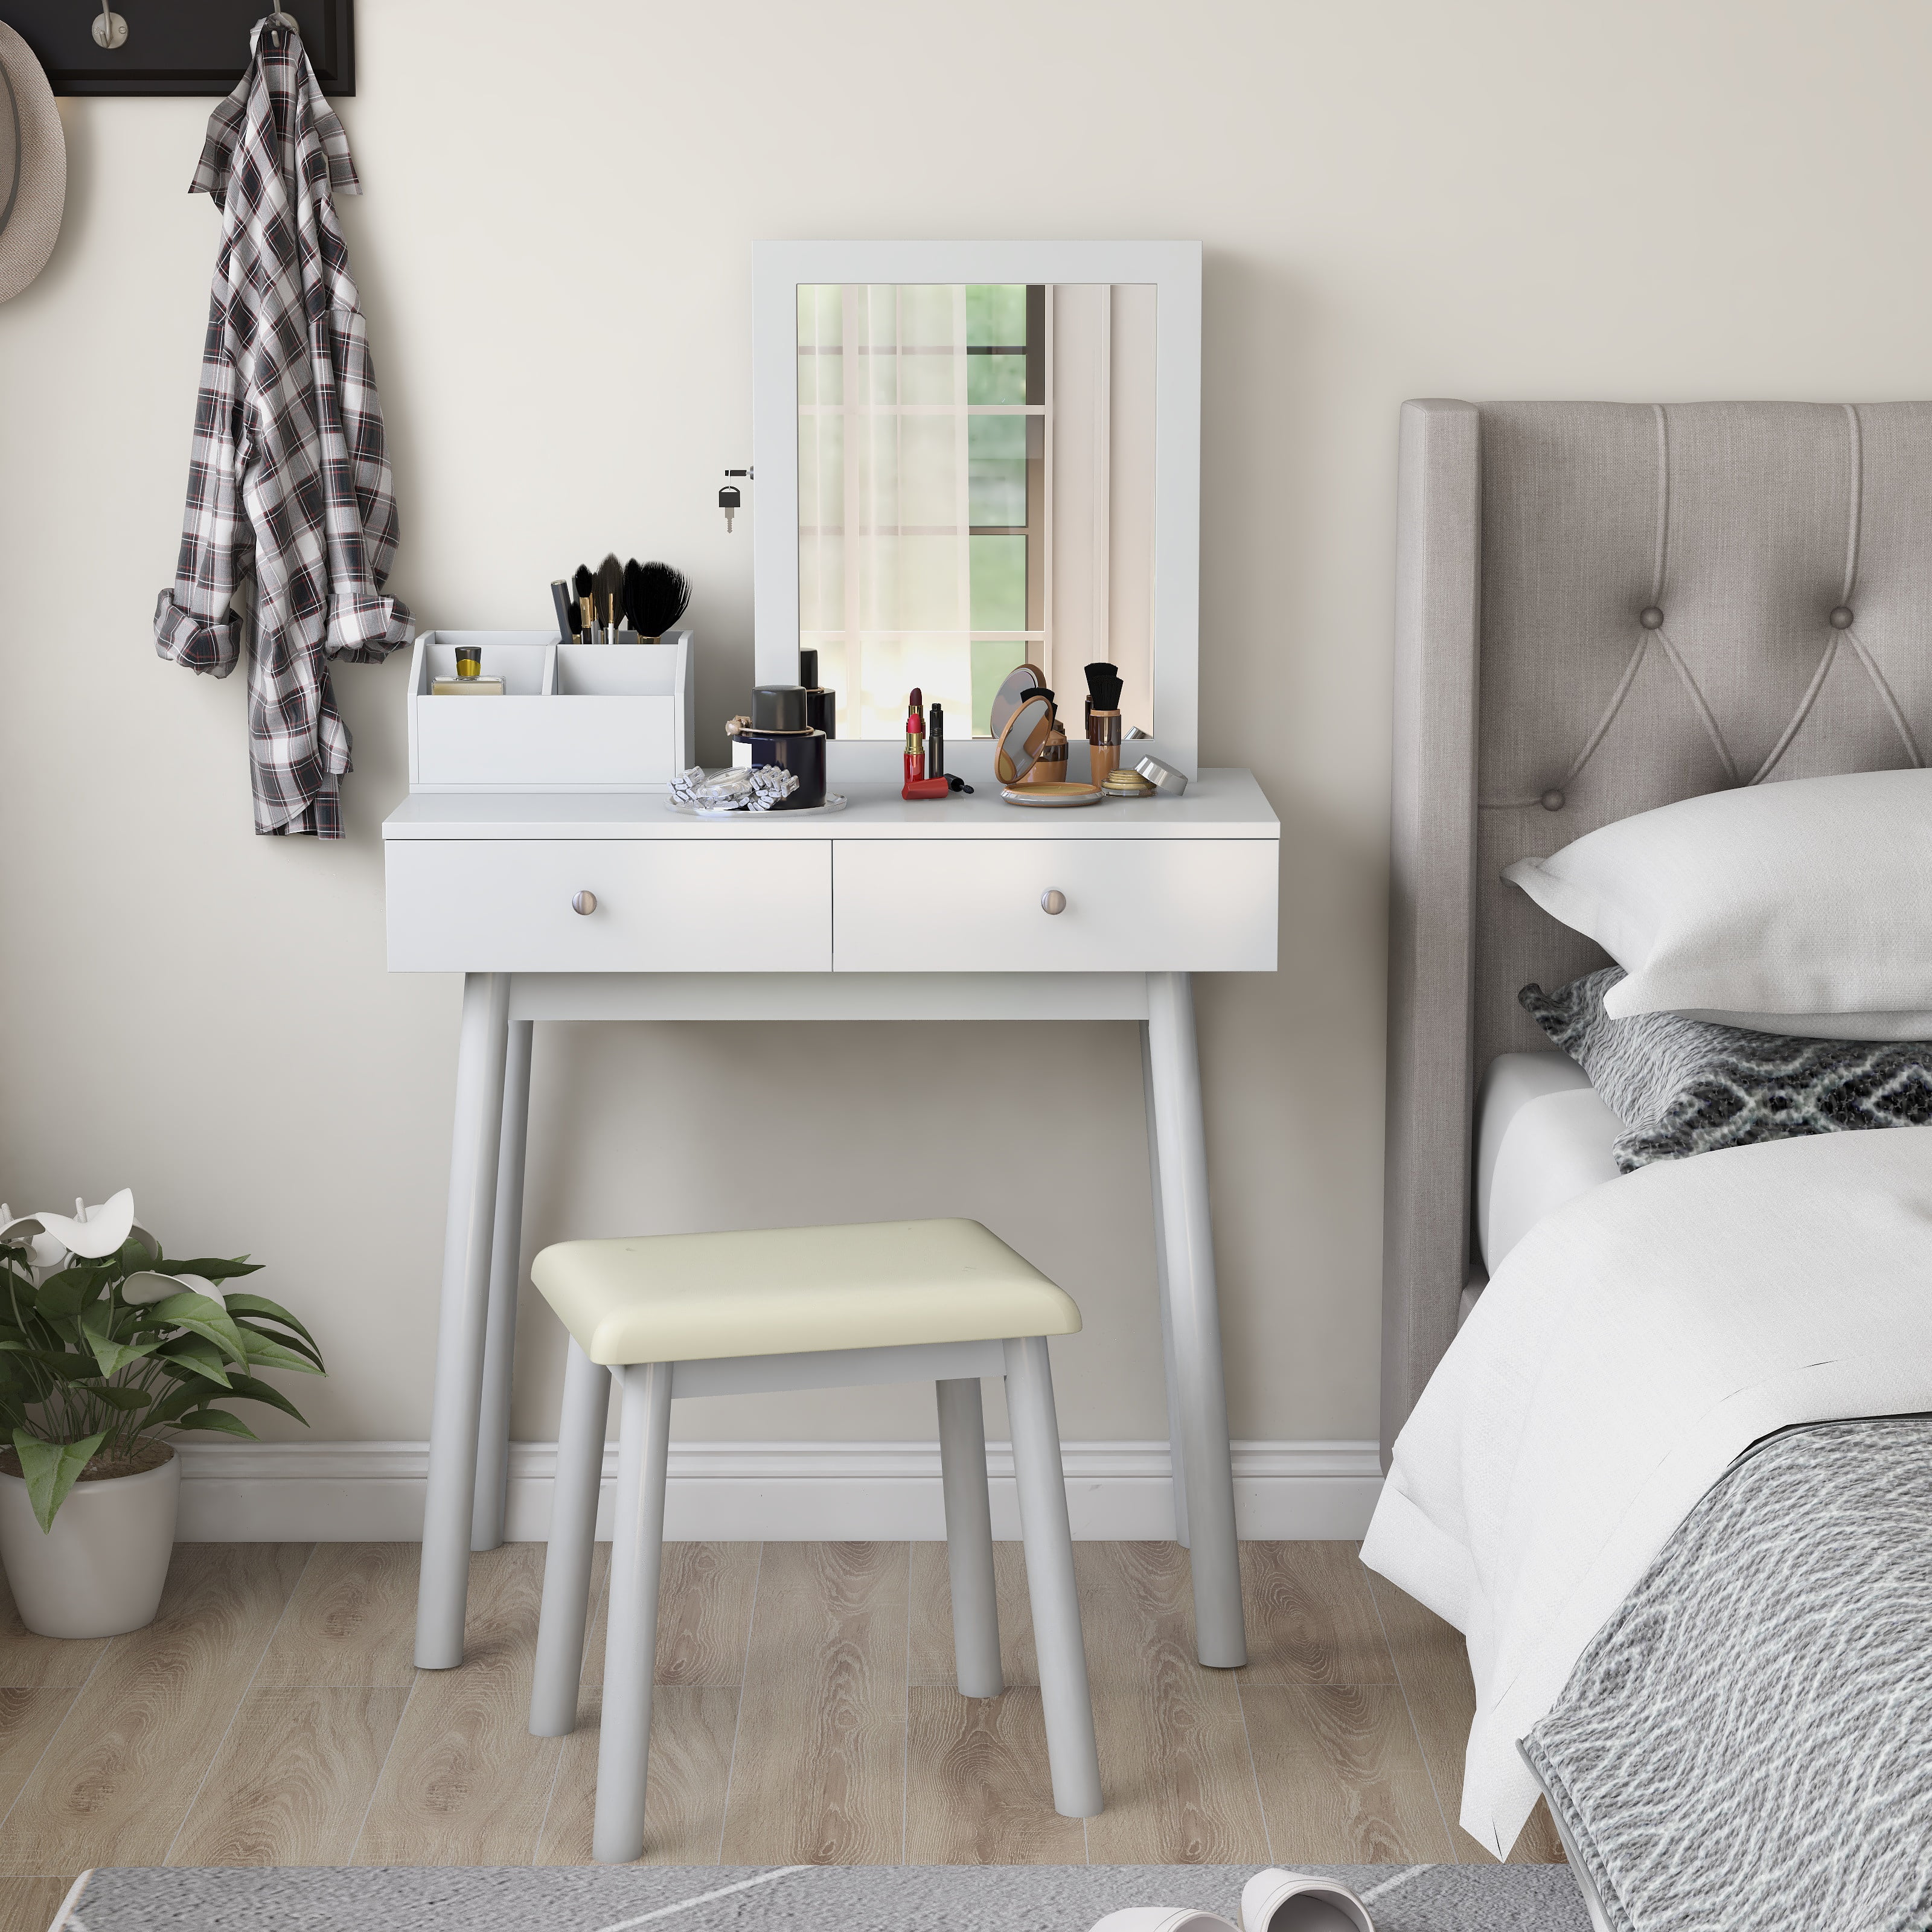 Details about   Vanity Makeup Dressing Table Set W/ Square Mirror Stool 4 Drawers White Bedroom 